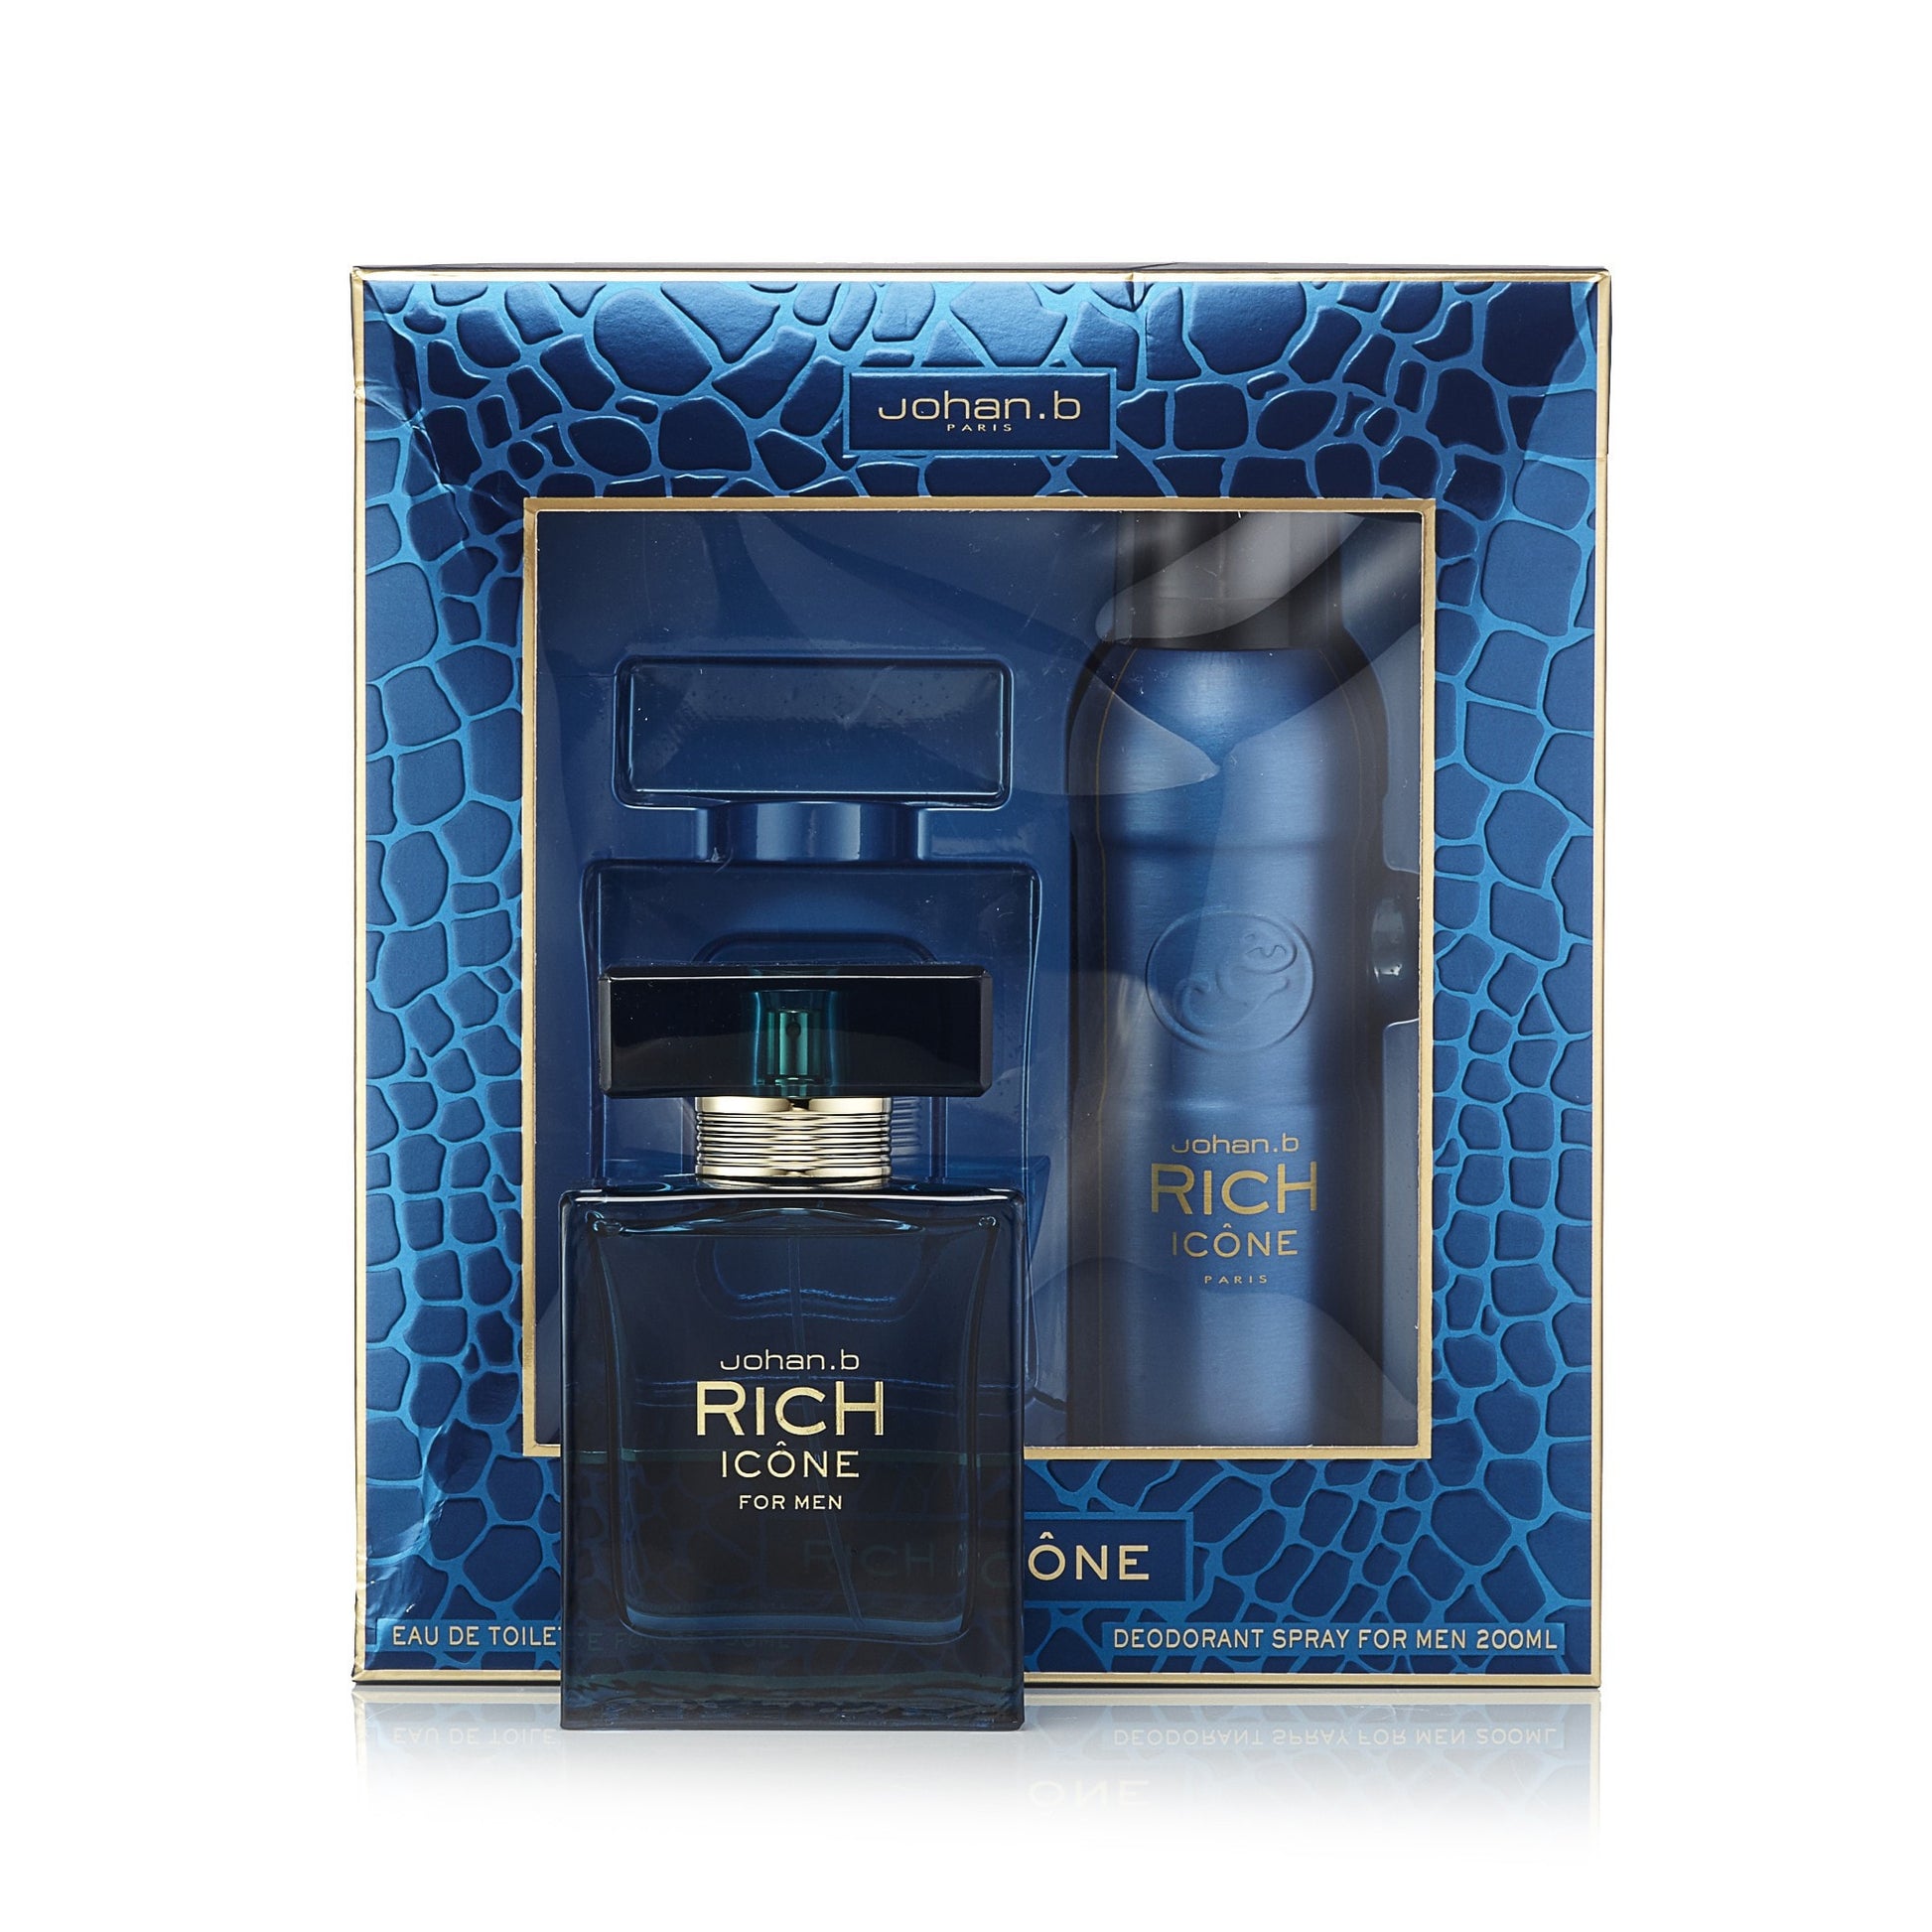 Rich Icone Gift Set for Men, Product image 2